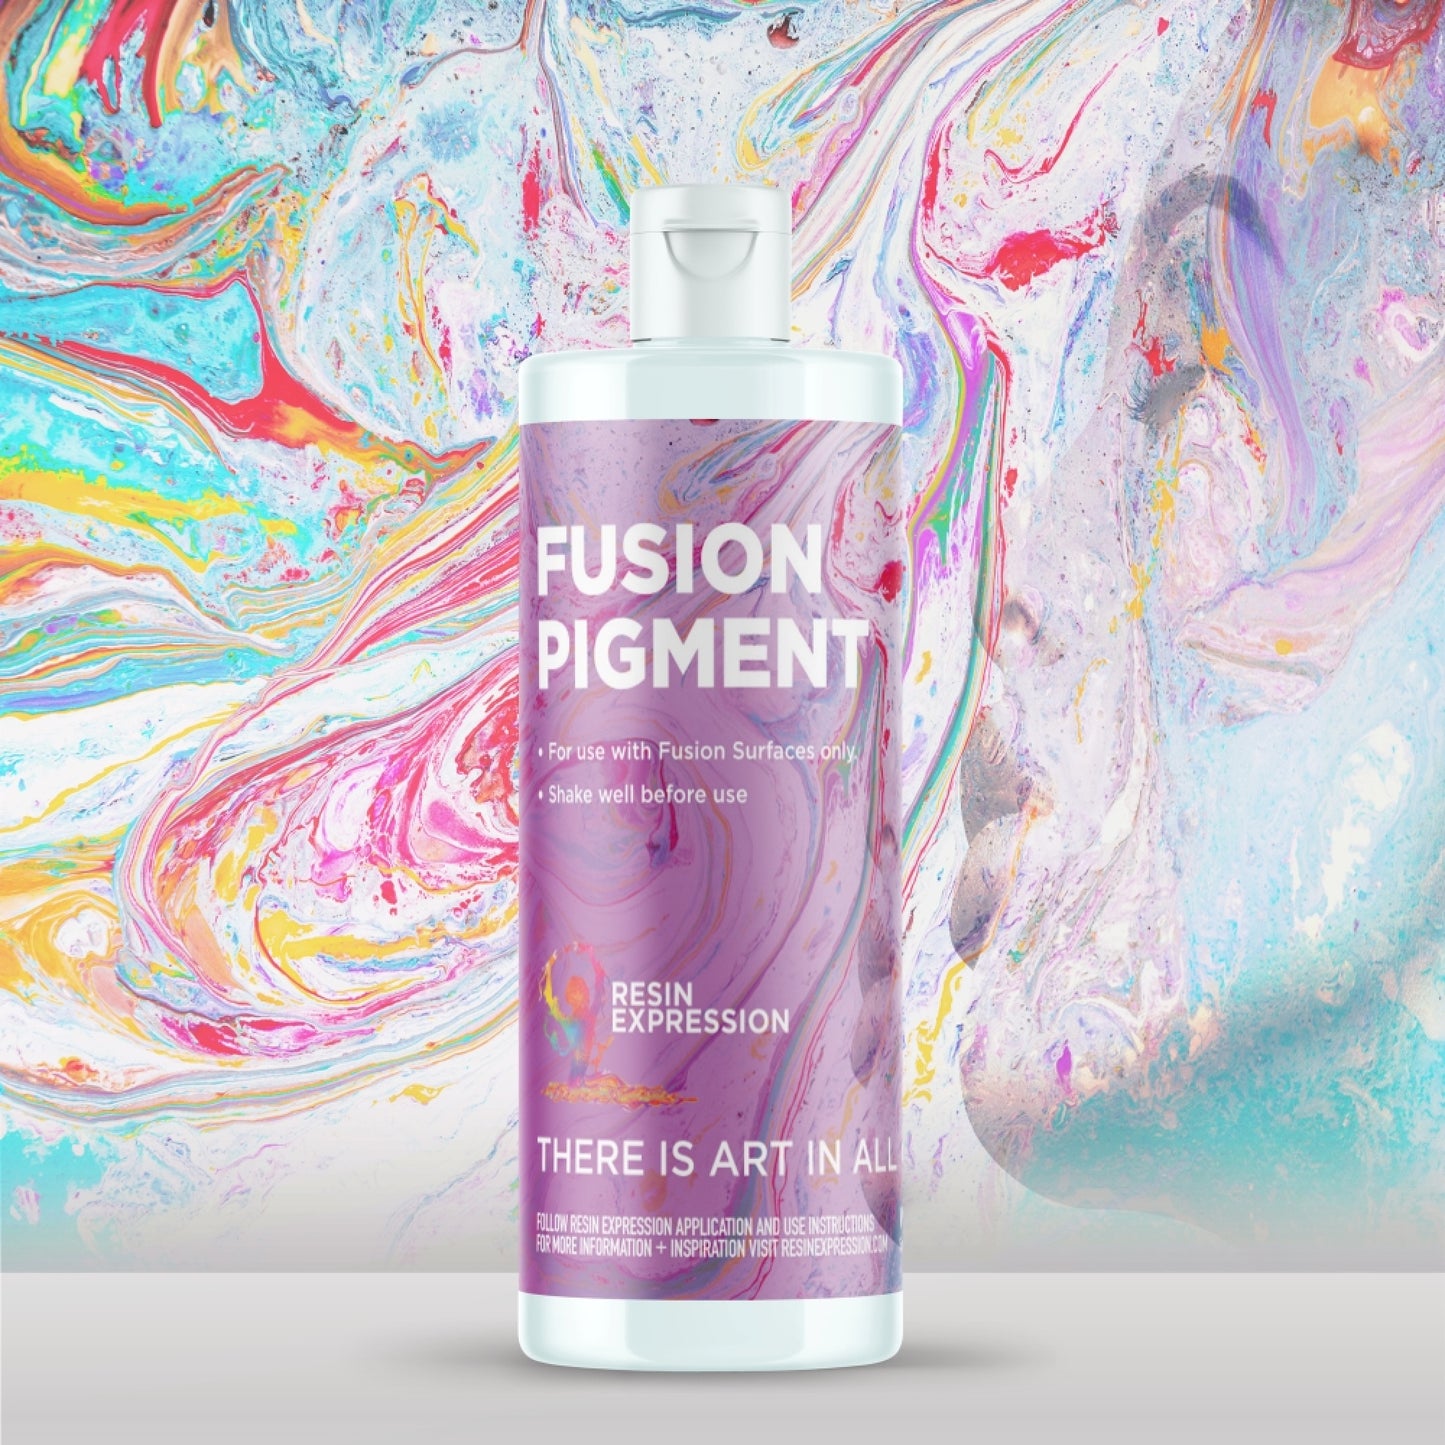 Easy DIY: Fusion Surface Resin Kit brings out the artist in you